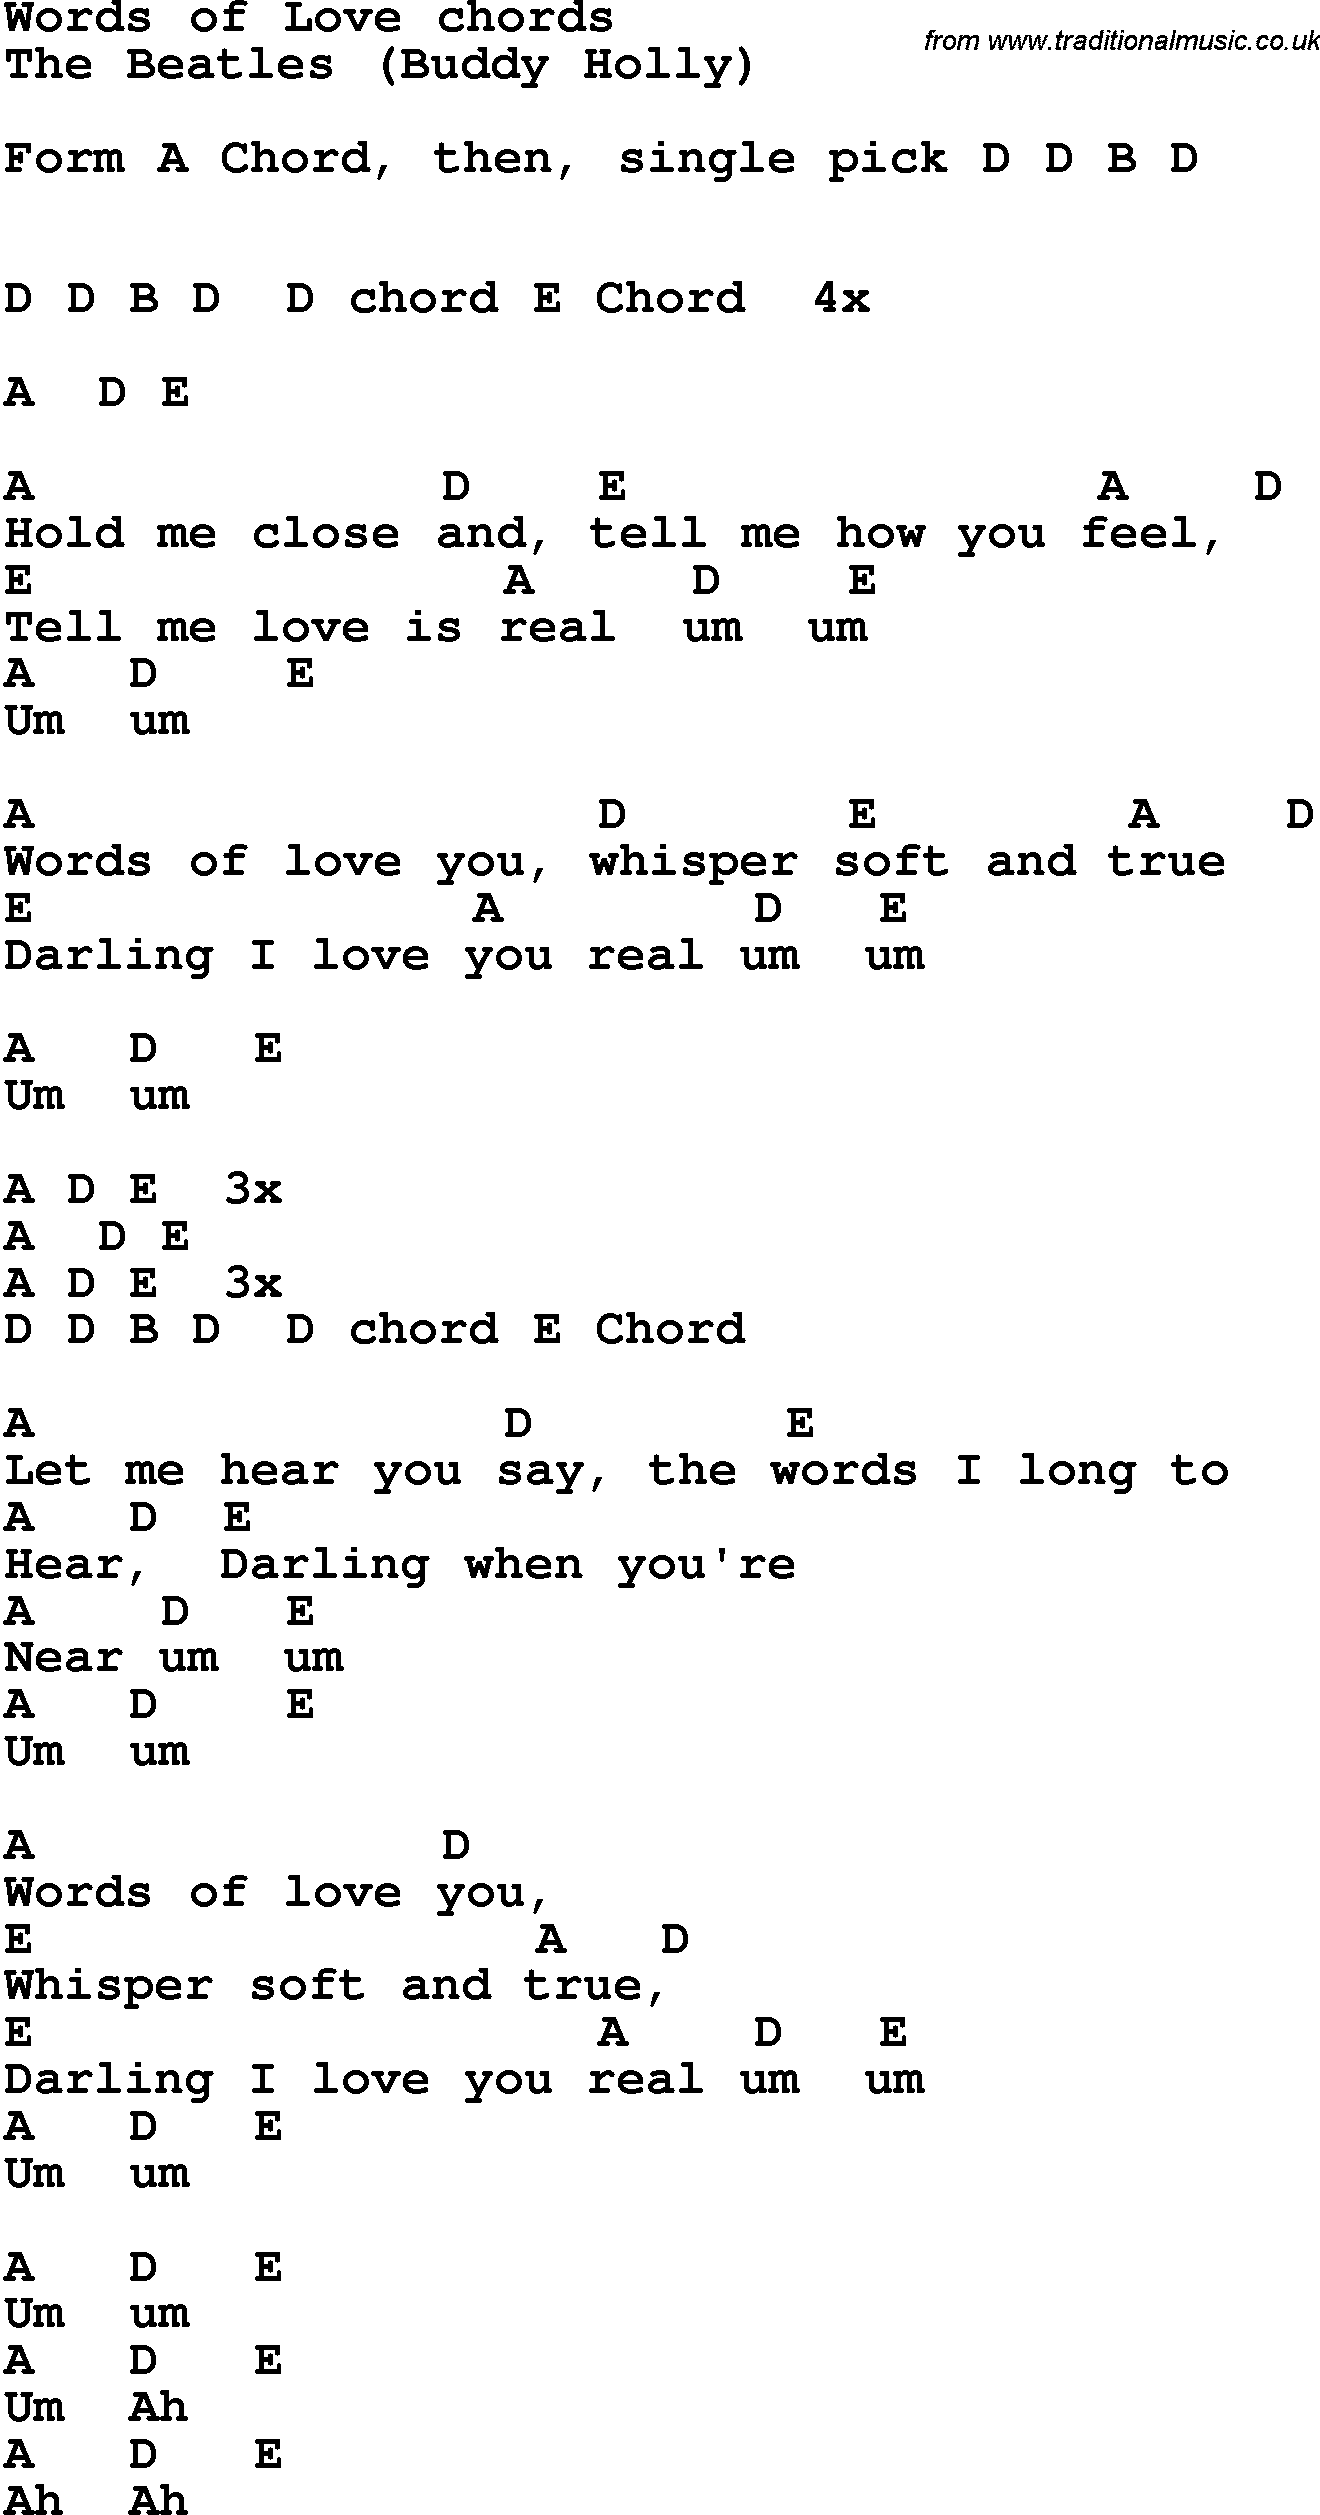 Song Lyrics with guitar chords for Words Of Love - The Beatles